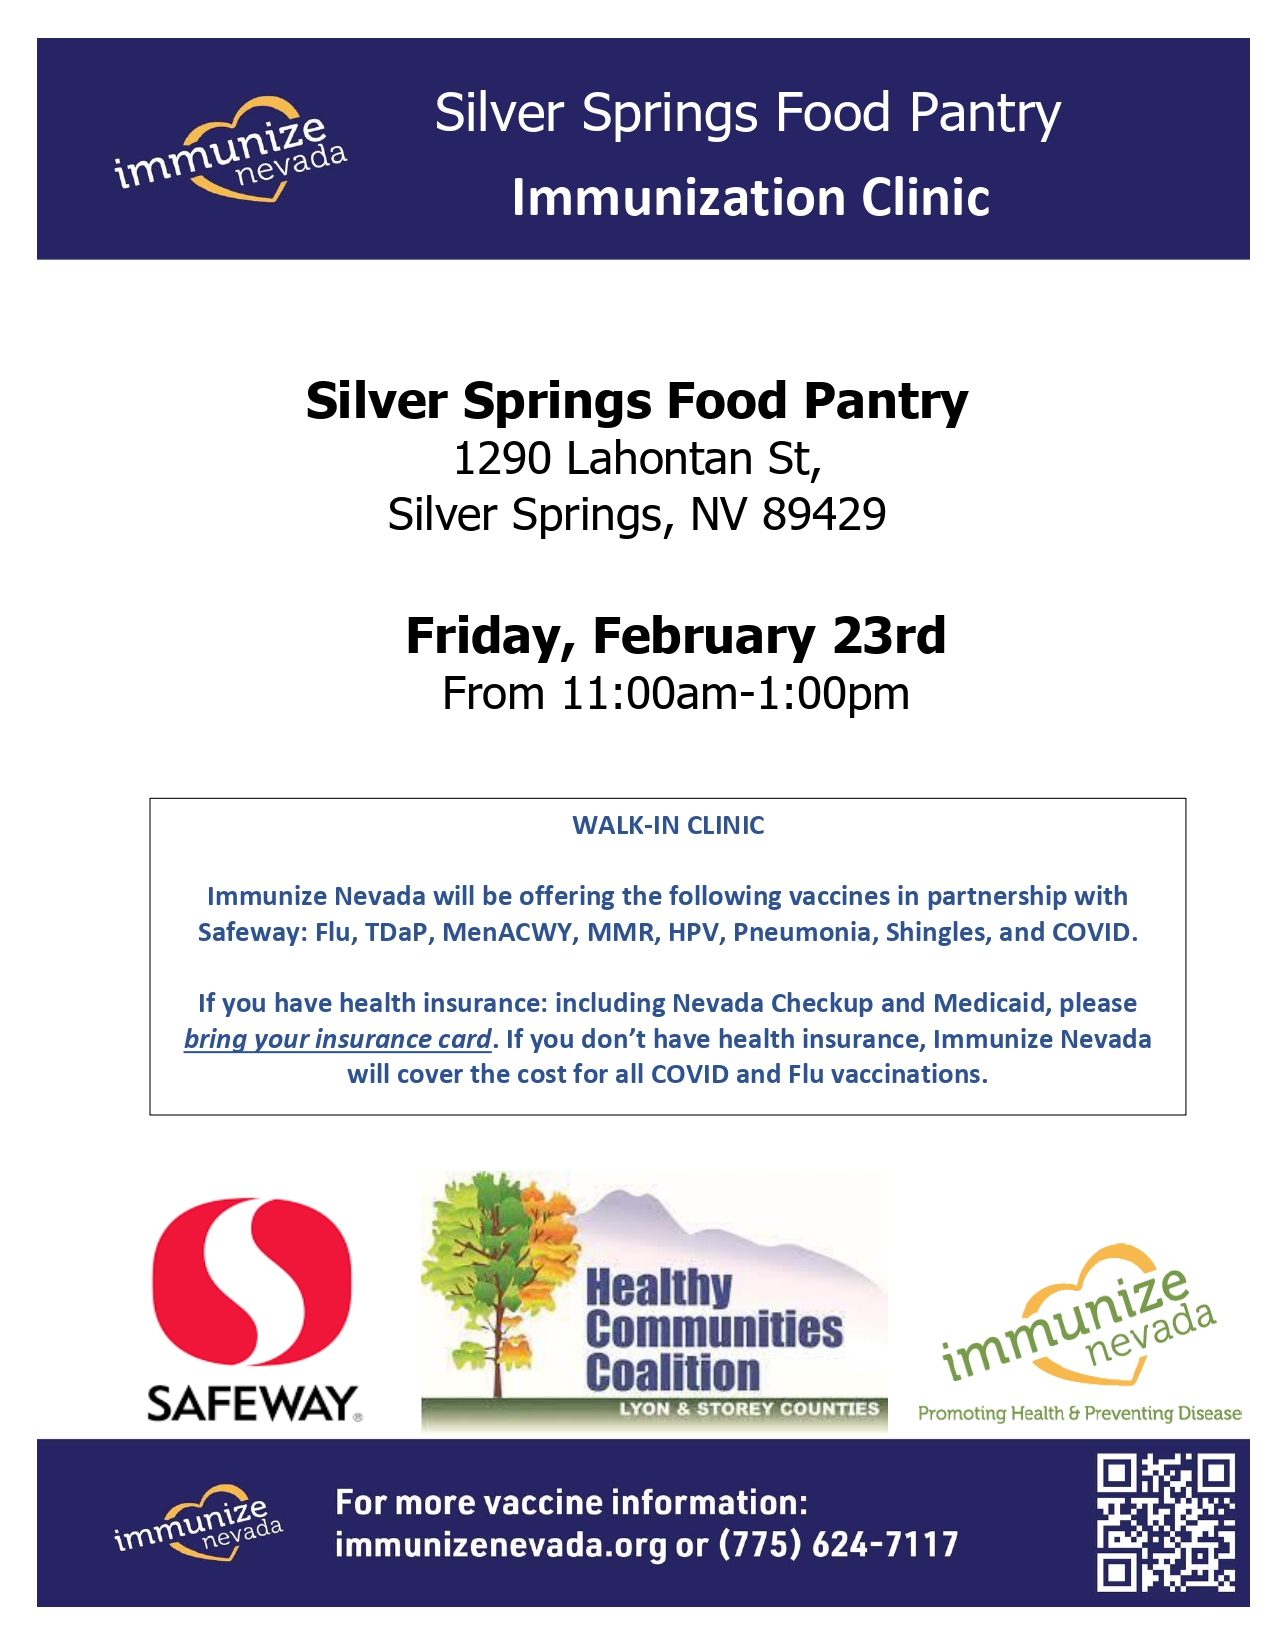 Silver Springs Food Pantry Clinic 